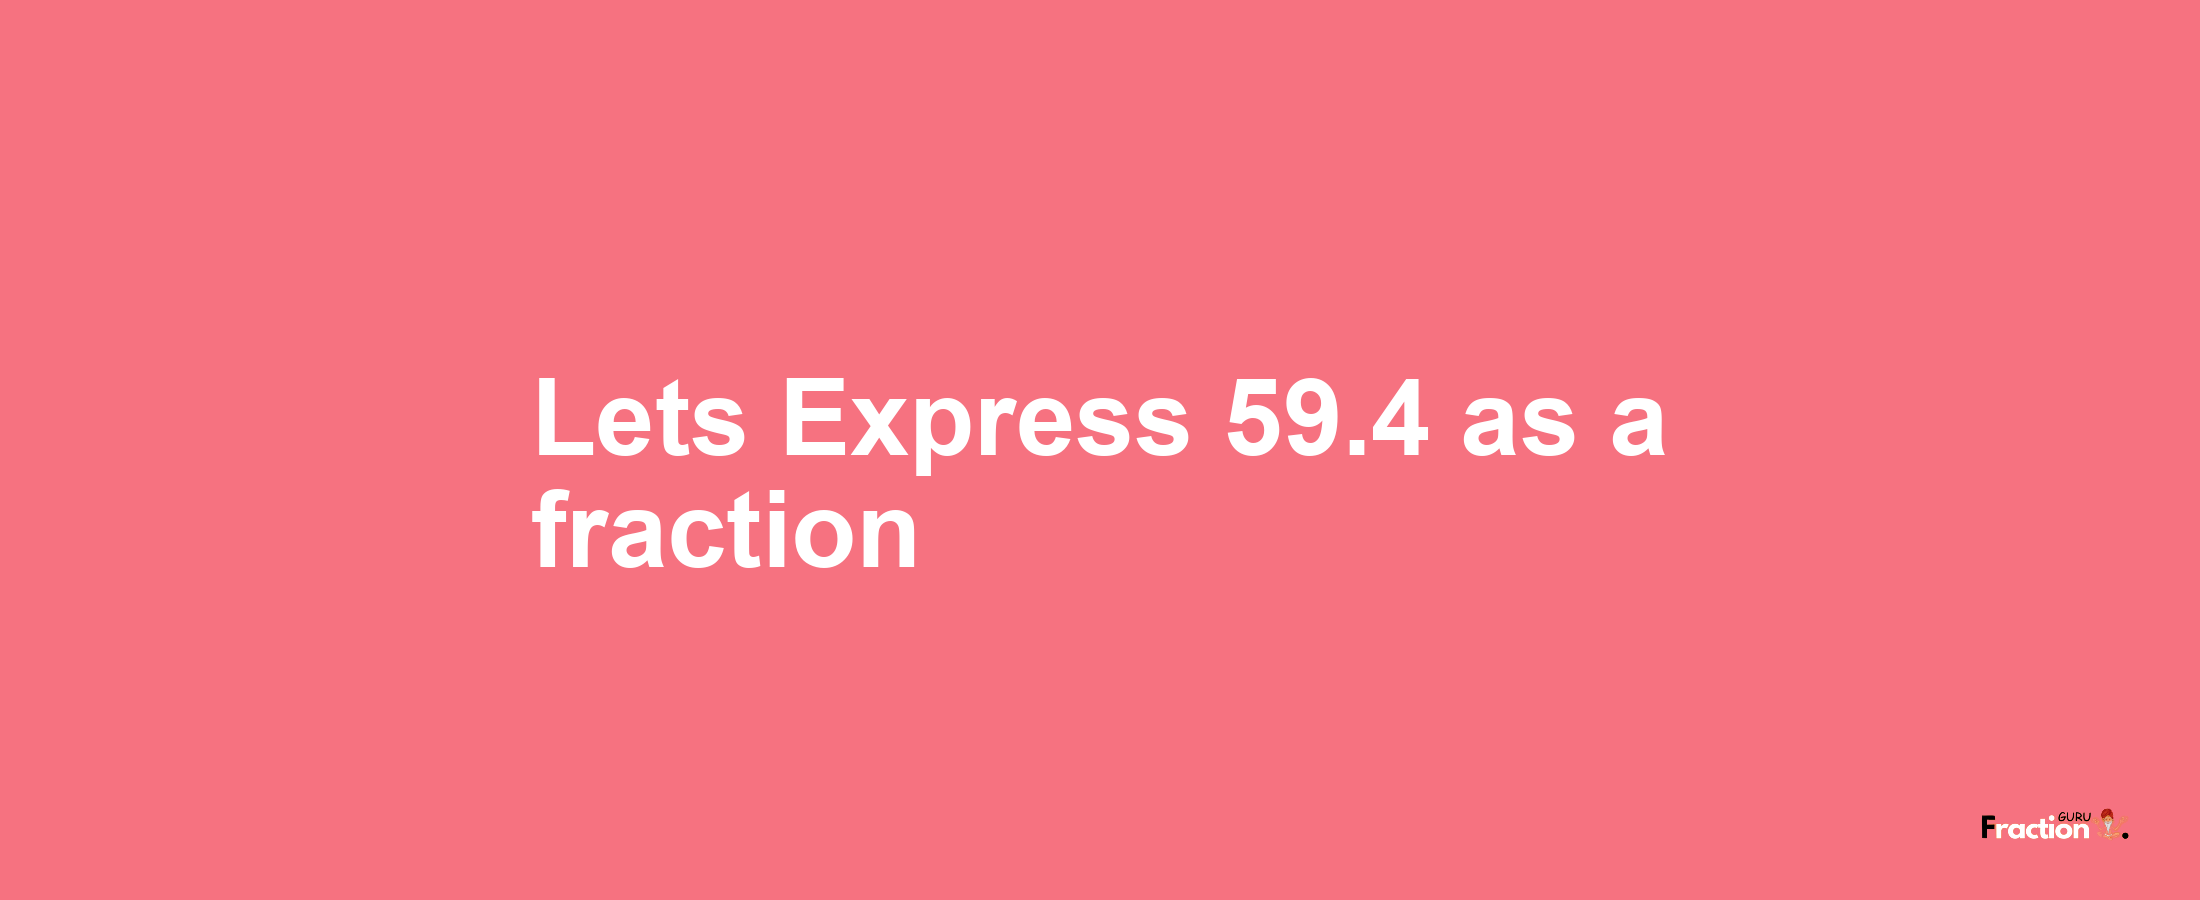 Lets Express 59.4 as afraction